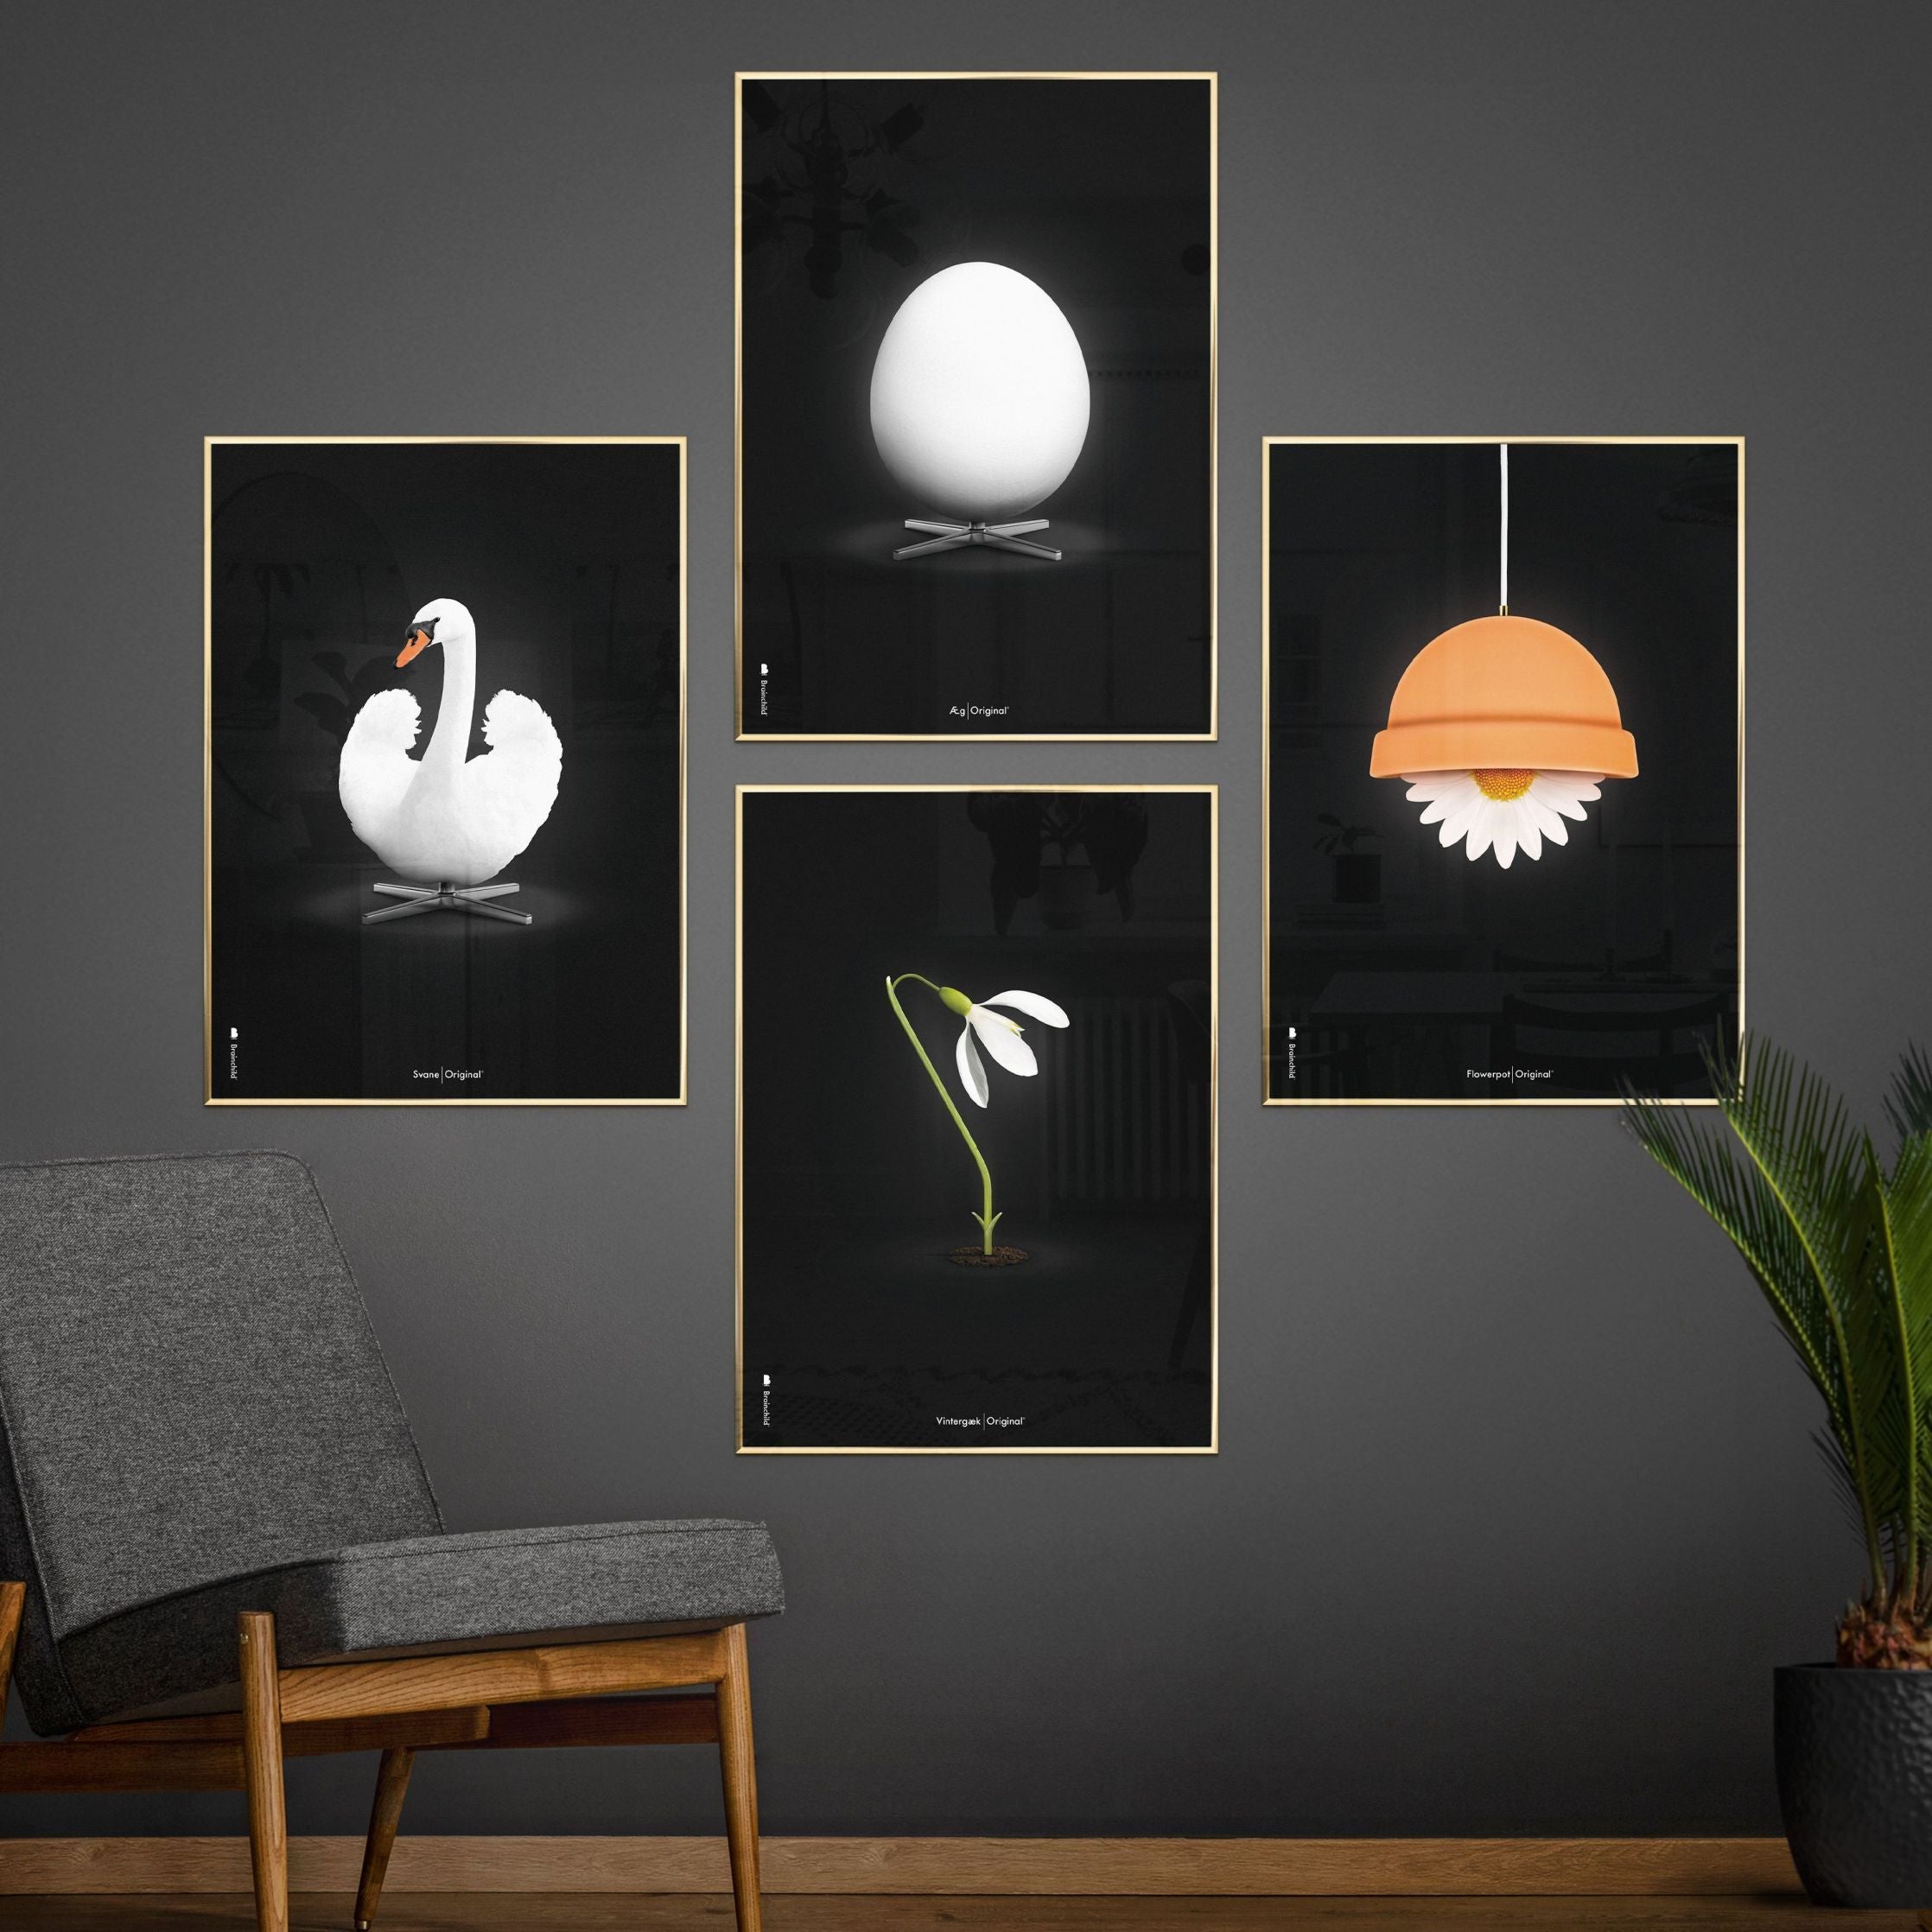 Brainchild Swan Classic Poster Without Frame 30 X40 Cm, White/White Background